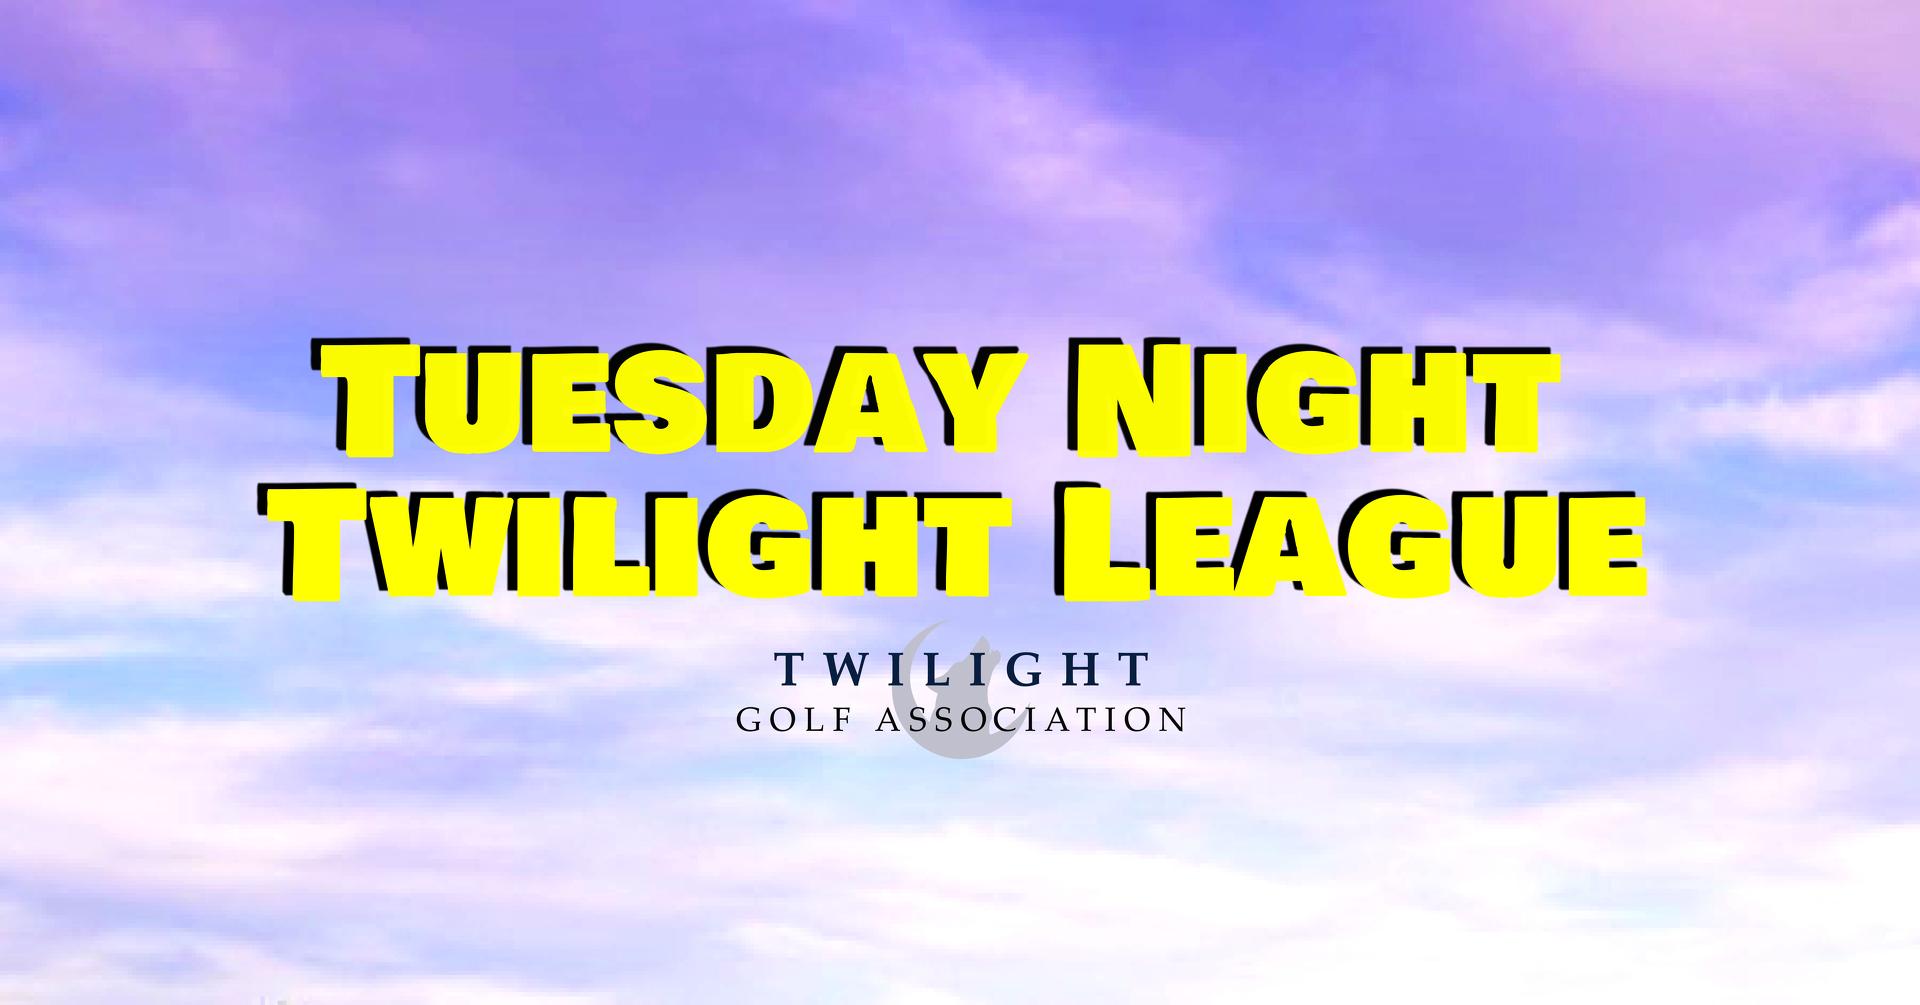 Tuesday Twilight League at Riverpines Golf Course